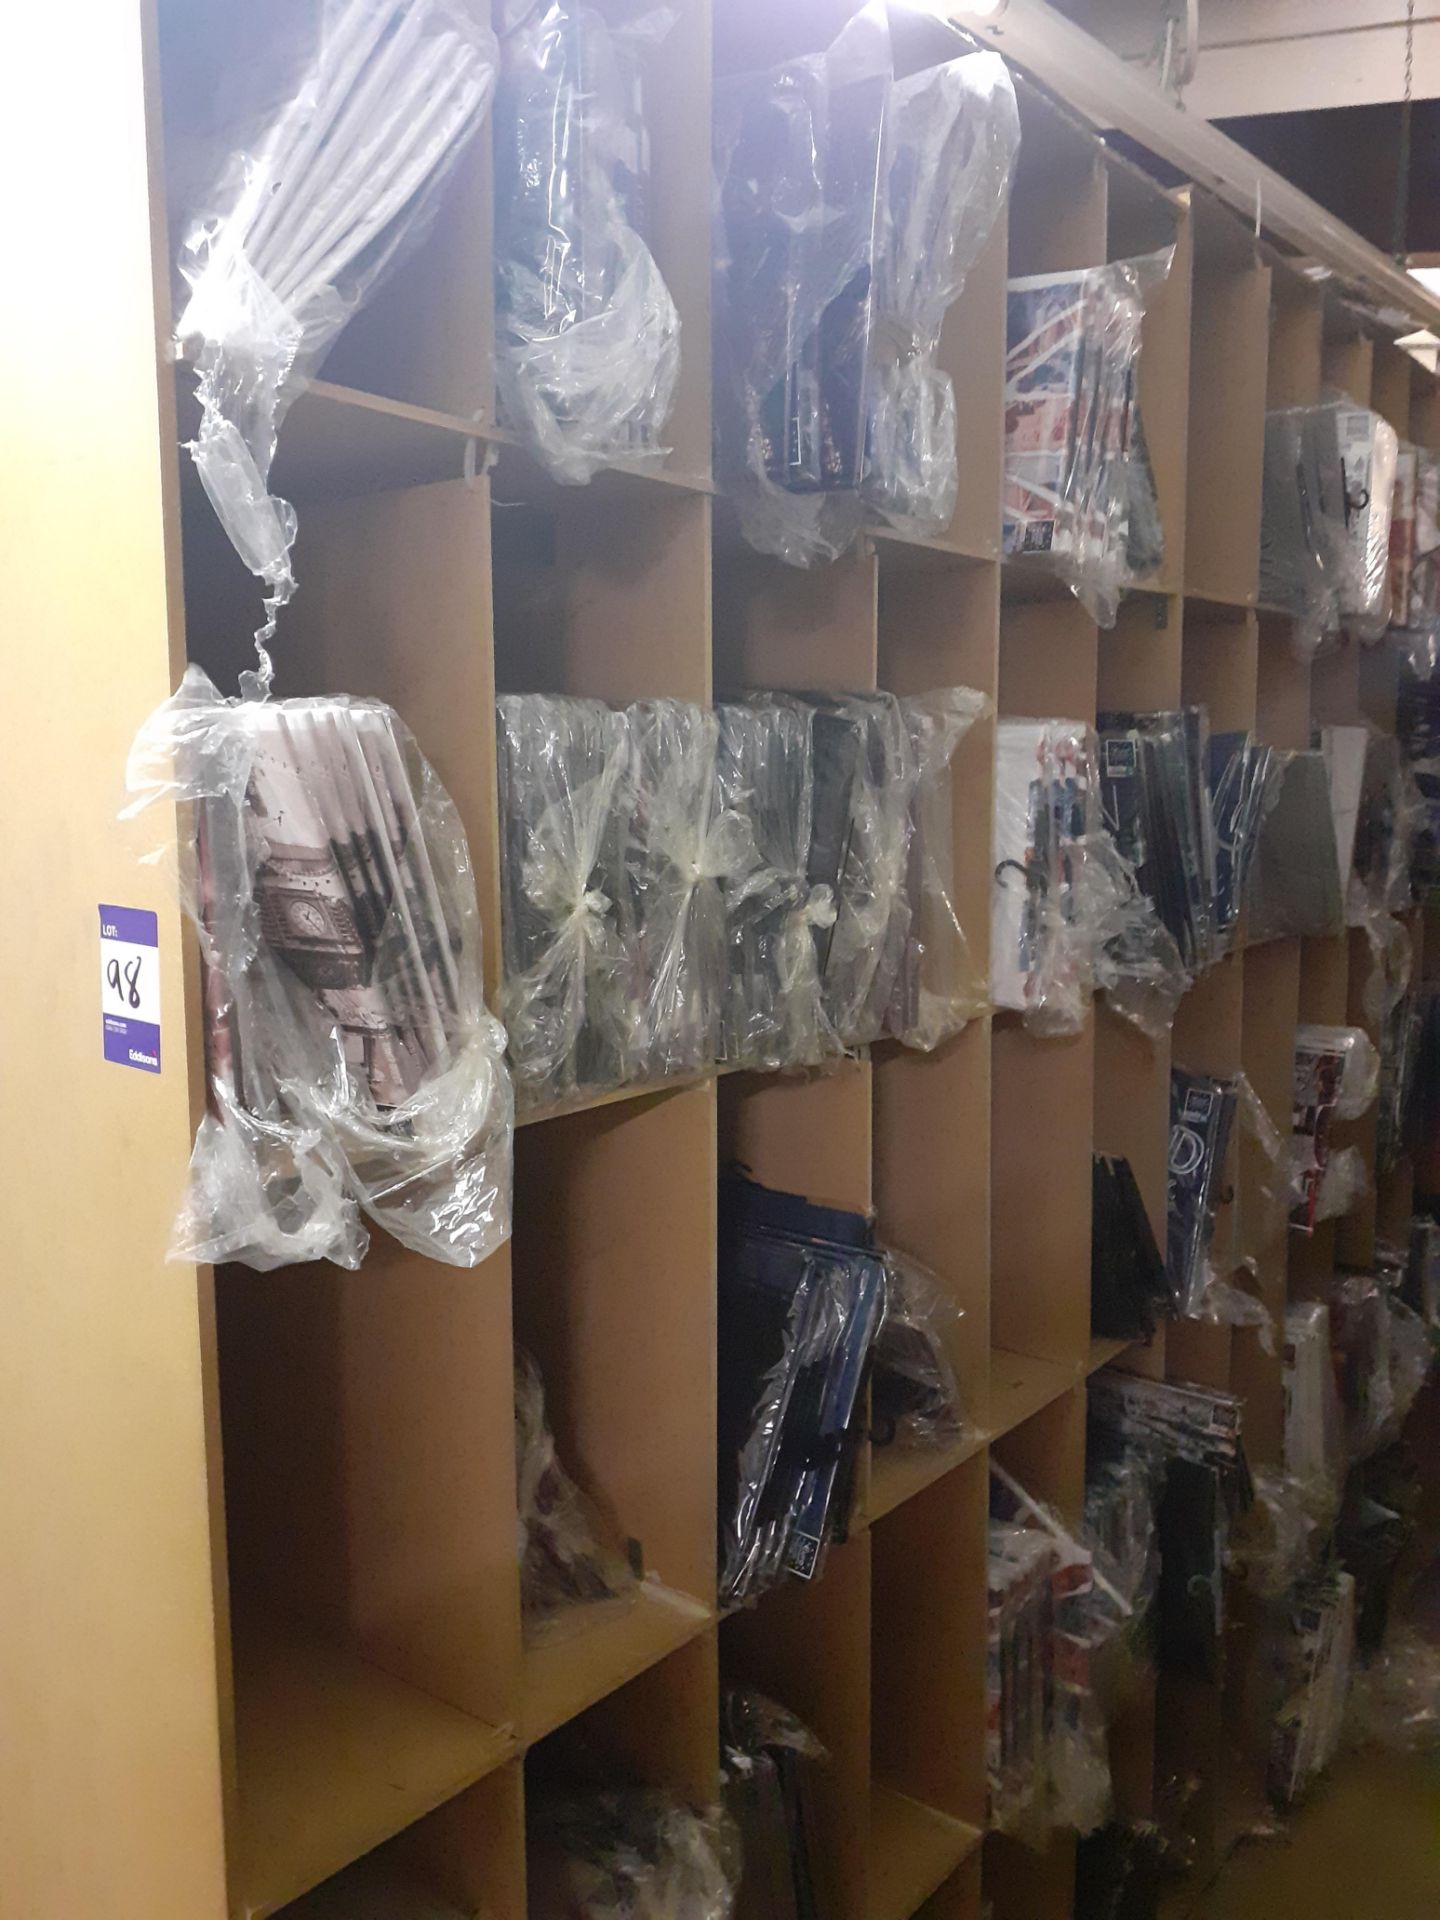 Large Quantity of Tourist Themed T-Shirts to shelving